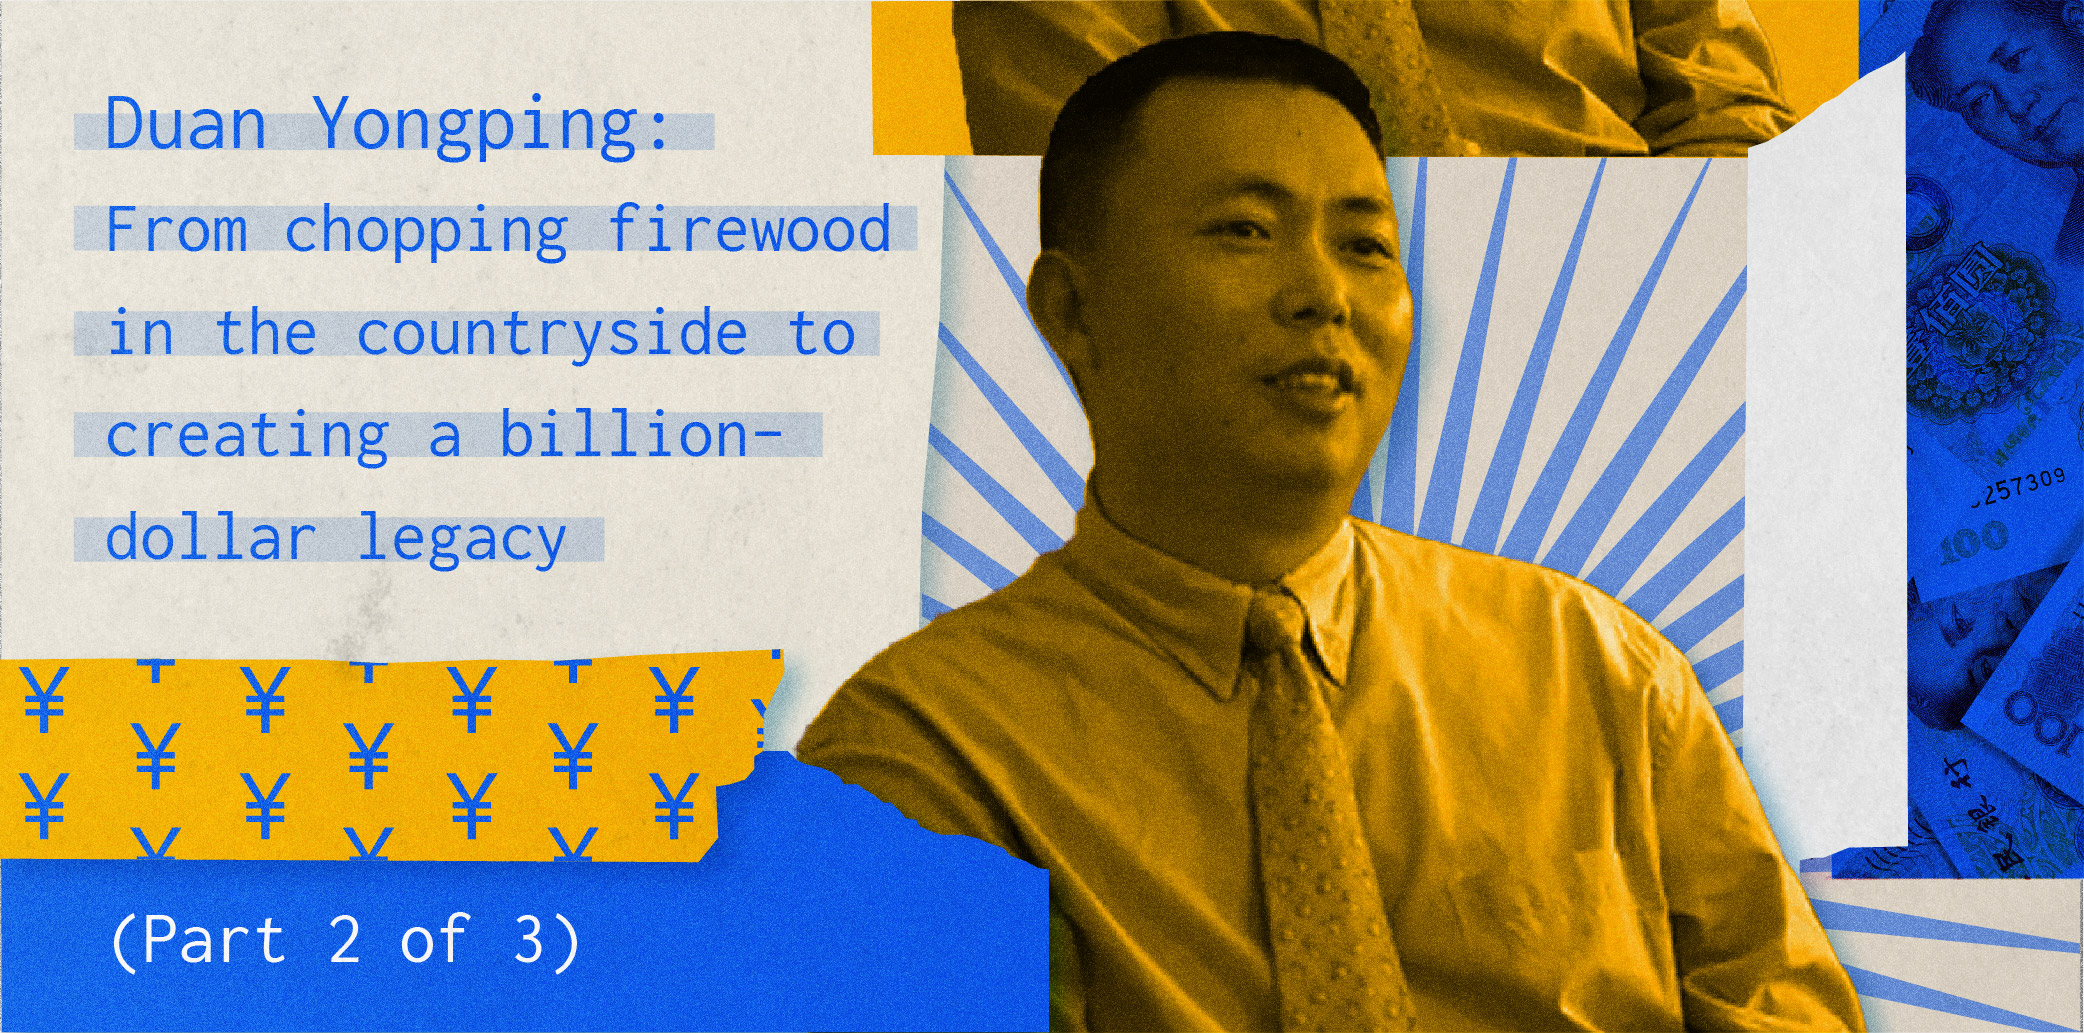 Duan Yongping: From chopping firewood in the countryside to creating a billion-dollar legacy (Part 2 of 3)